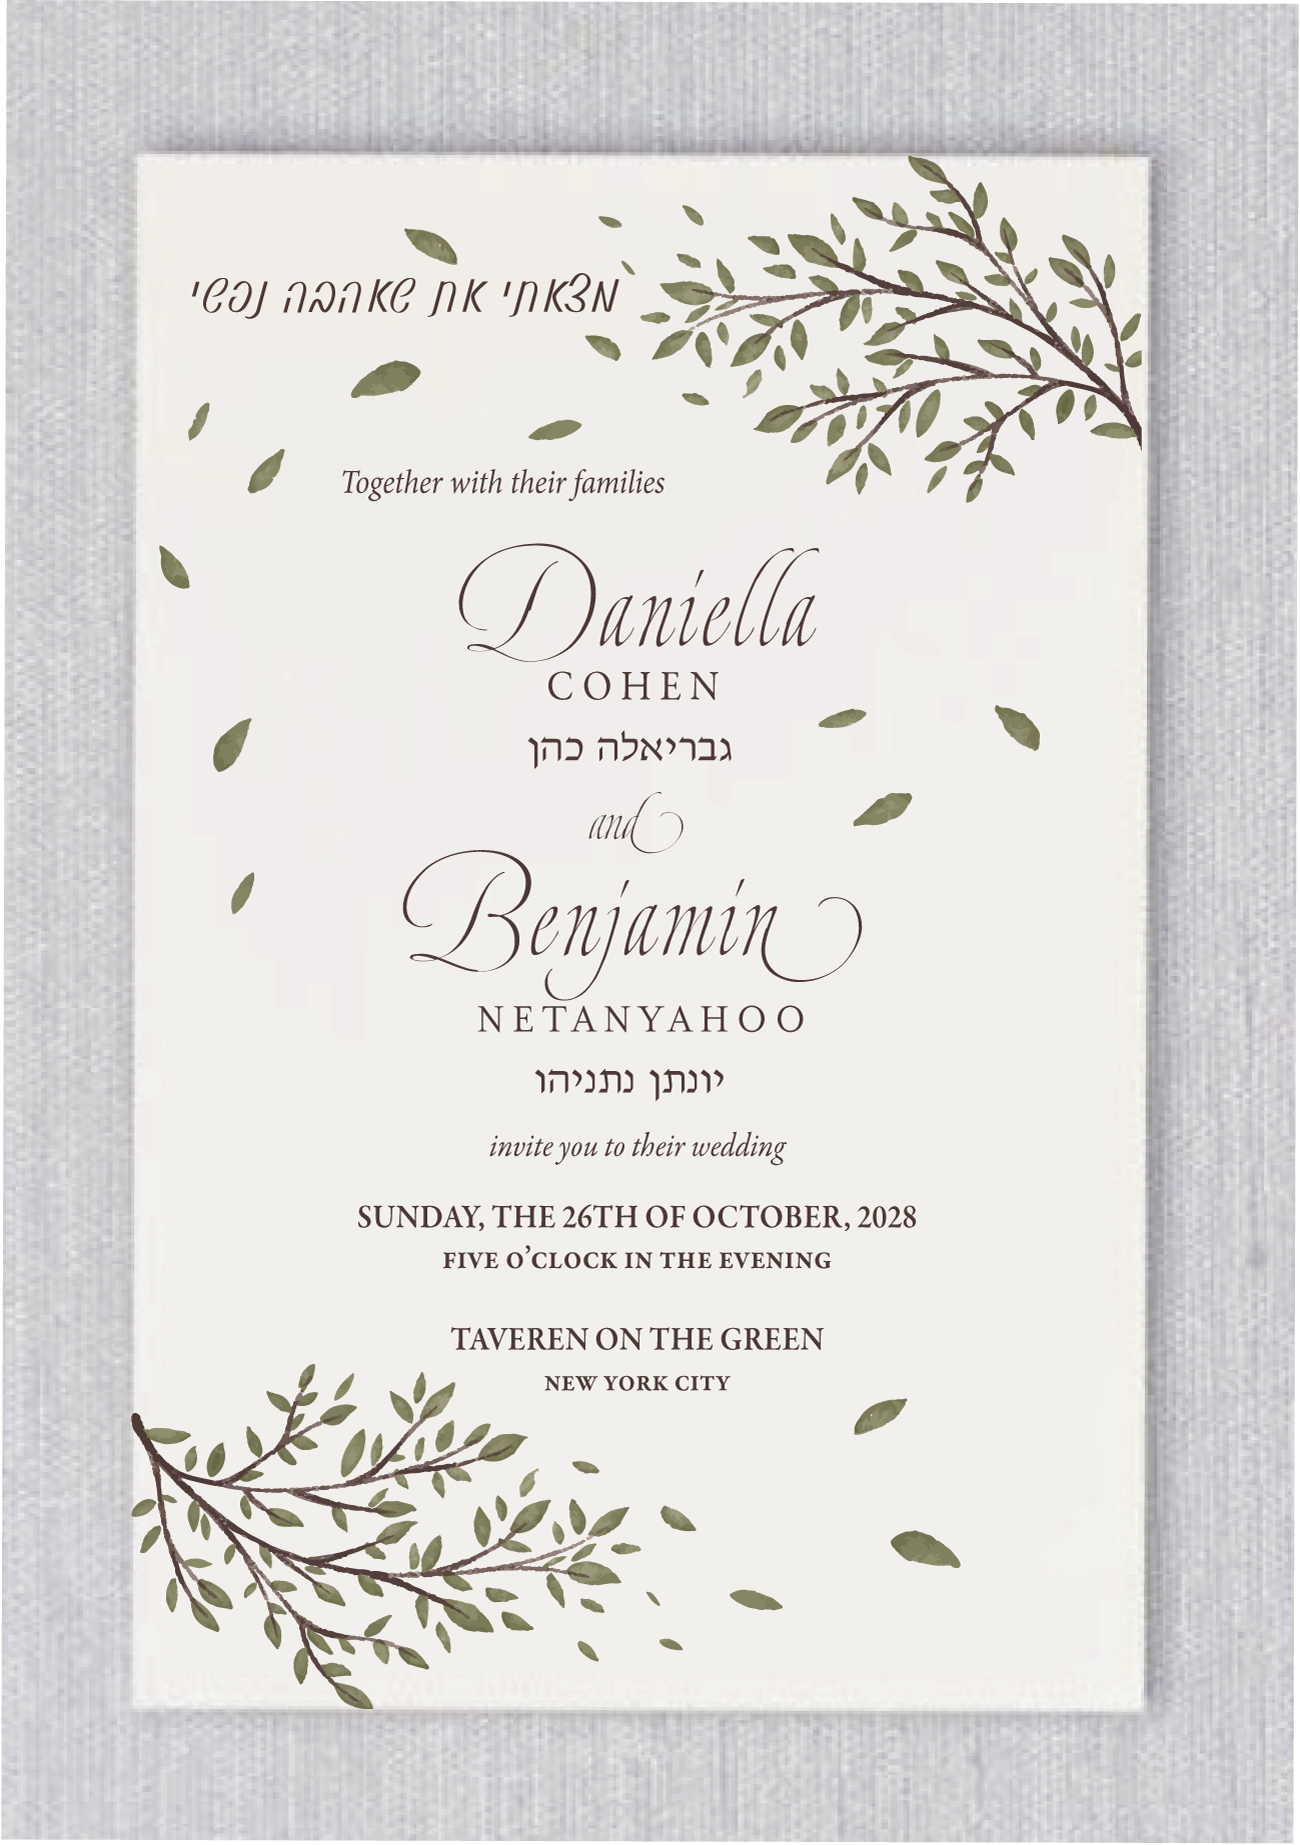 Beautiful botanical branches frame your wedding invitation details on this gorgeous Jewish wedding invitation. All of your custom wedding wording is spelled out in a mix of modern type and a light texture pattern adds a special touch along with your Hebrew names and the Passook: I found him whom my soul loves, in Hebrew. 